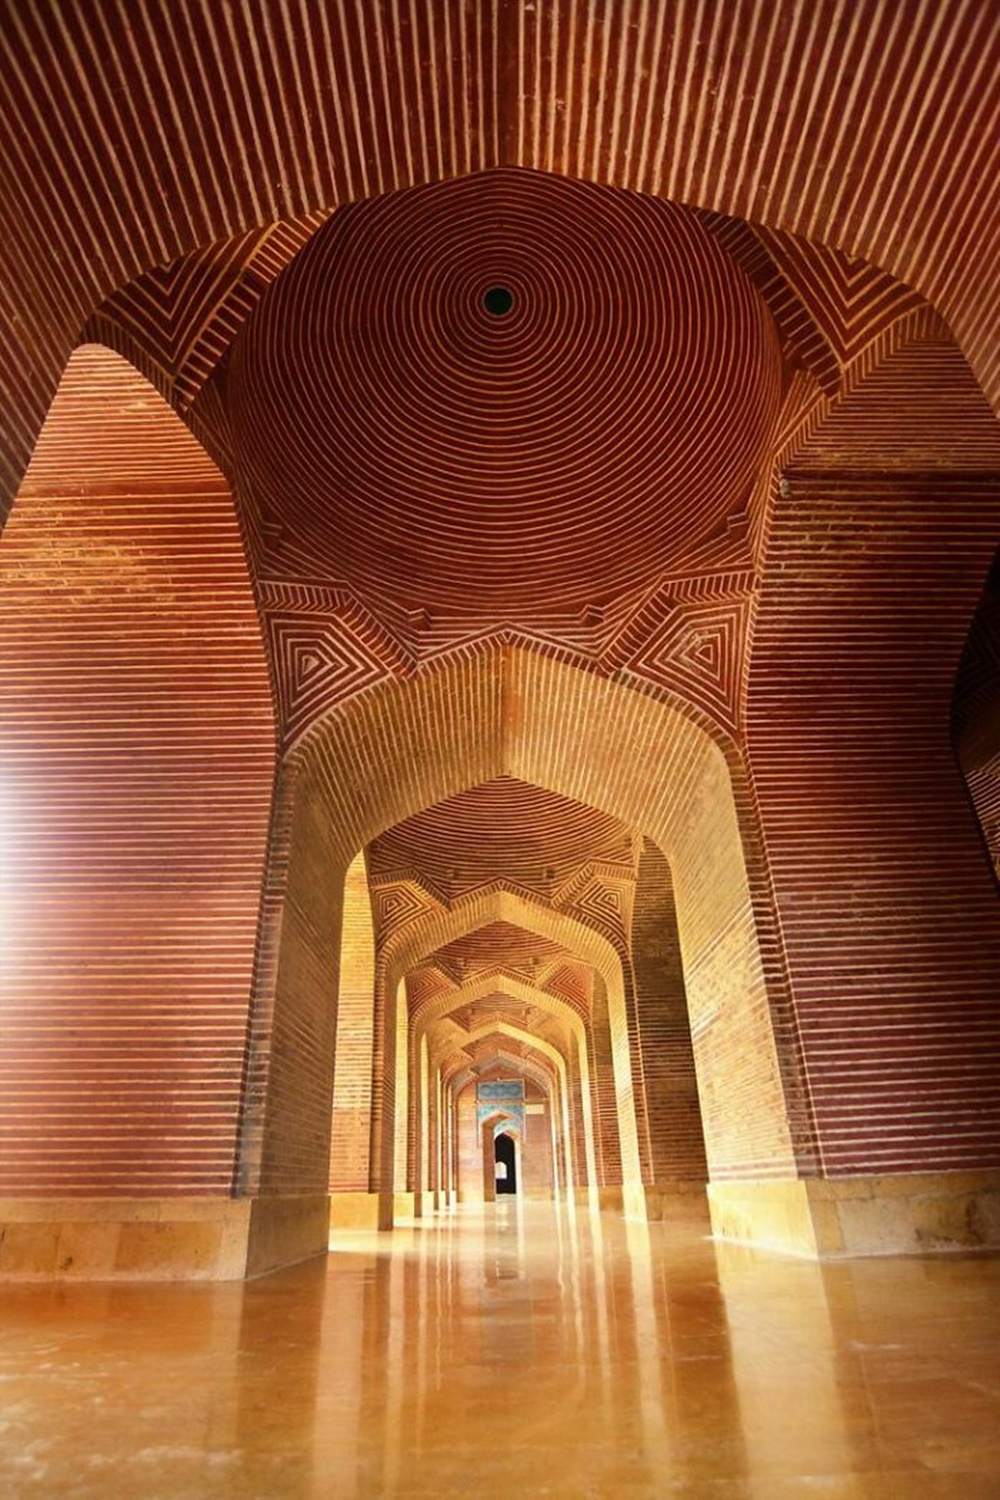 The 17th Century Shah Jahan Mosque In Pakistan, Notable For Its Geometric Brick Work